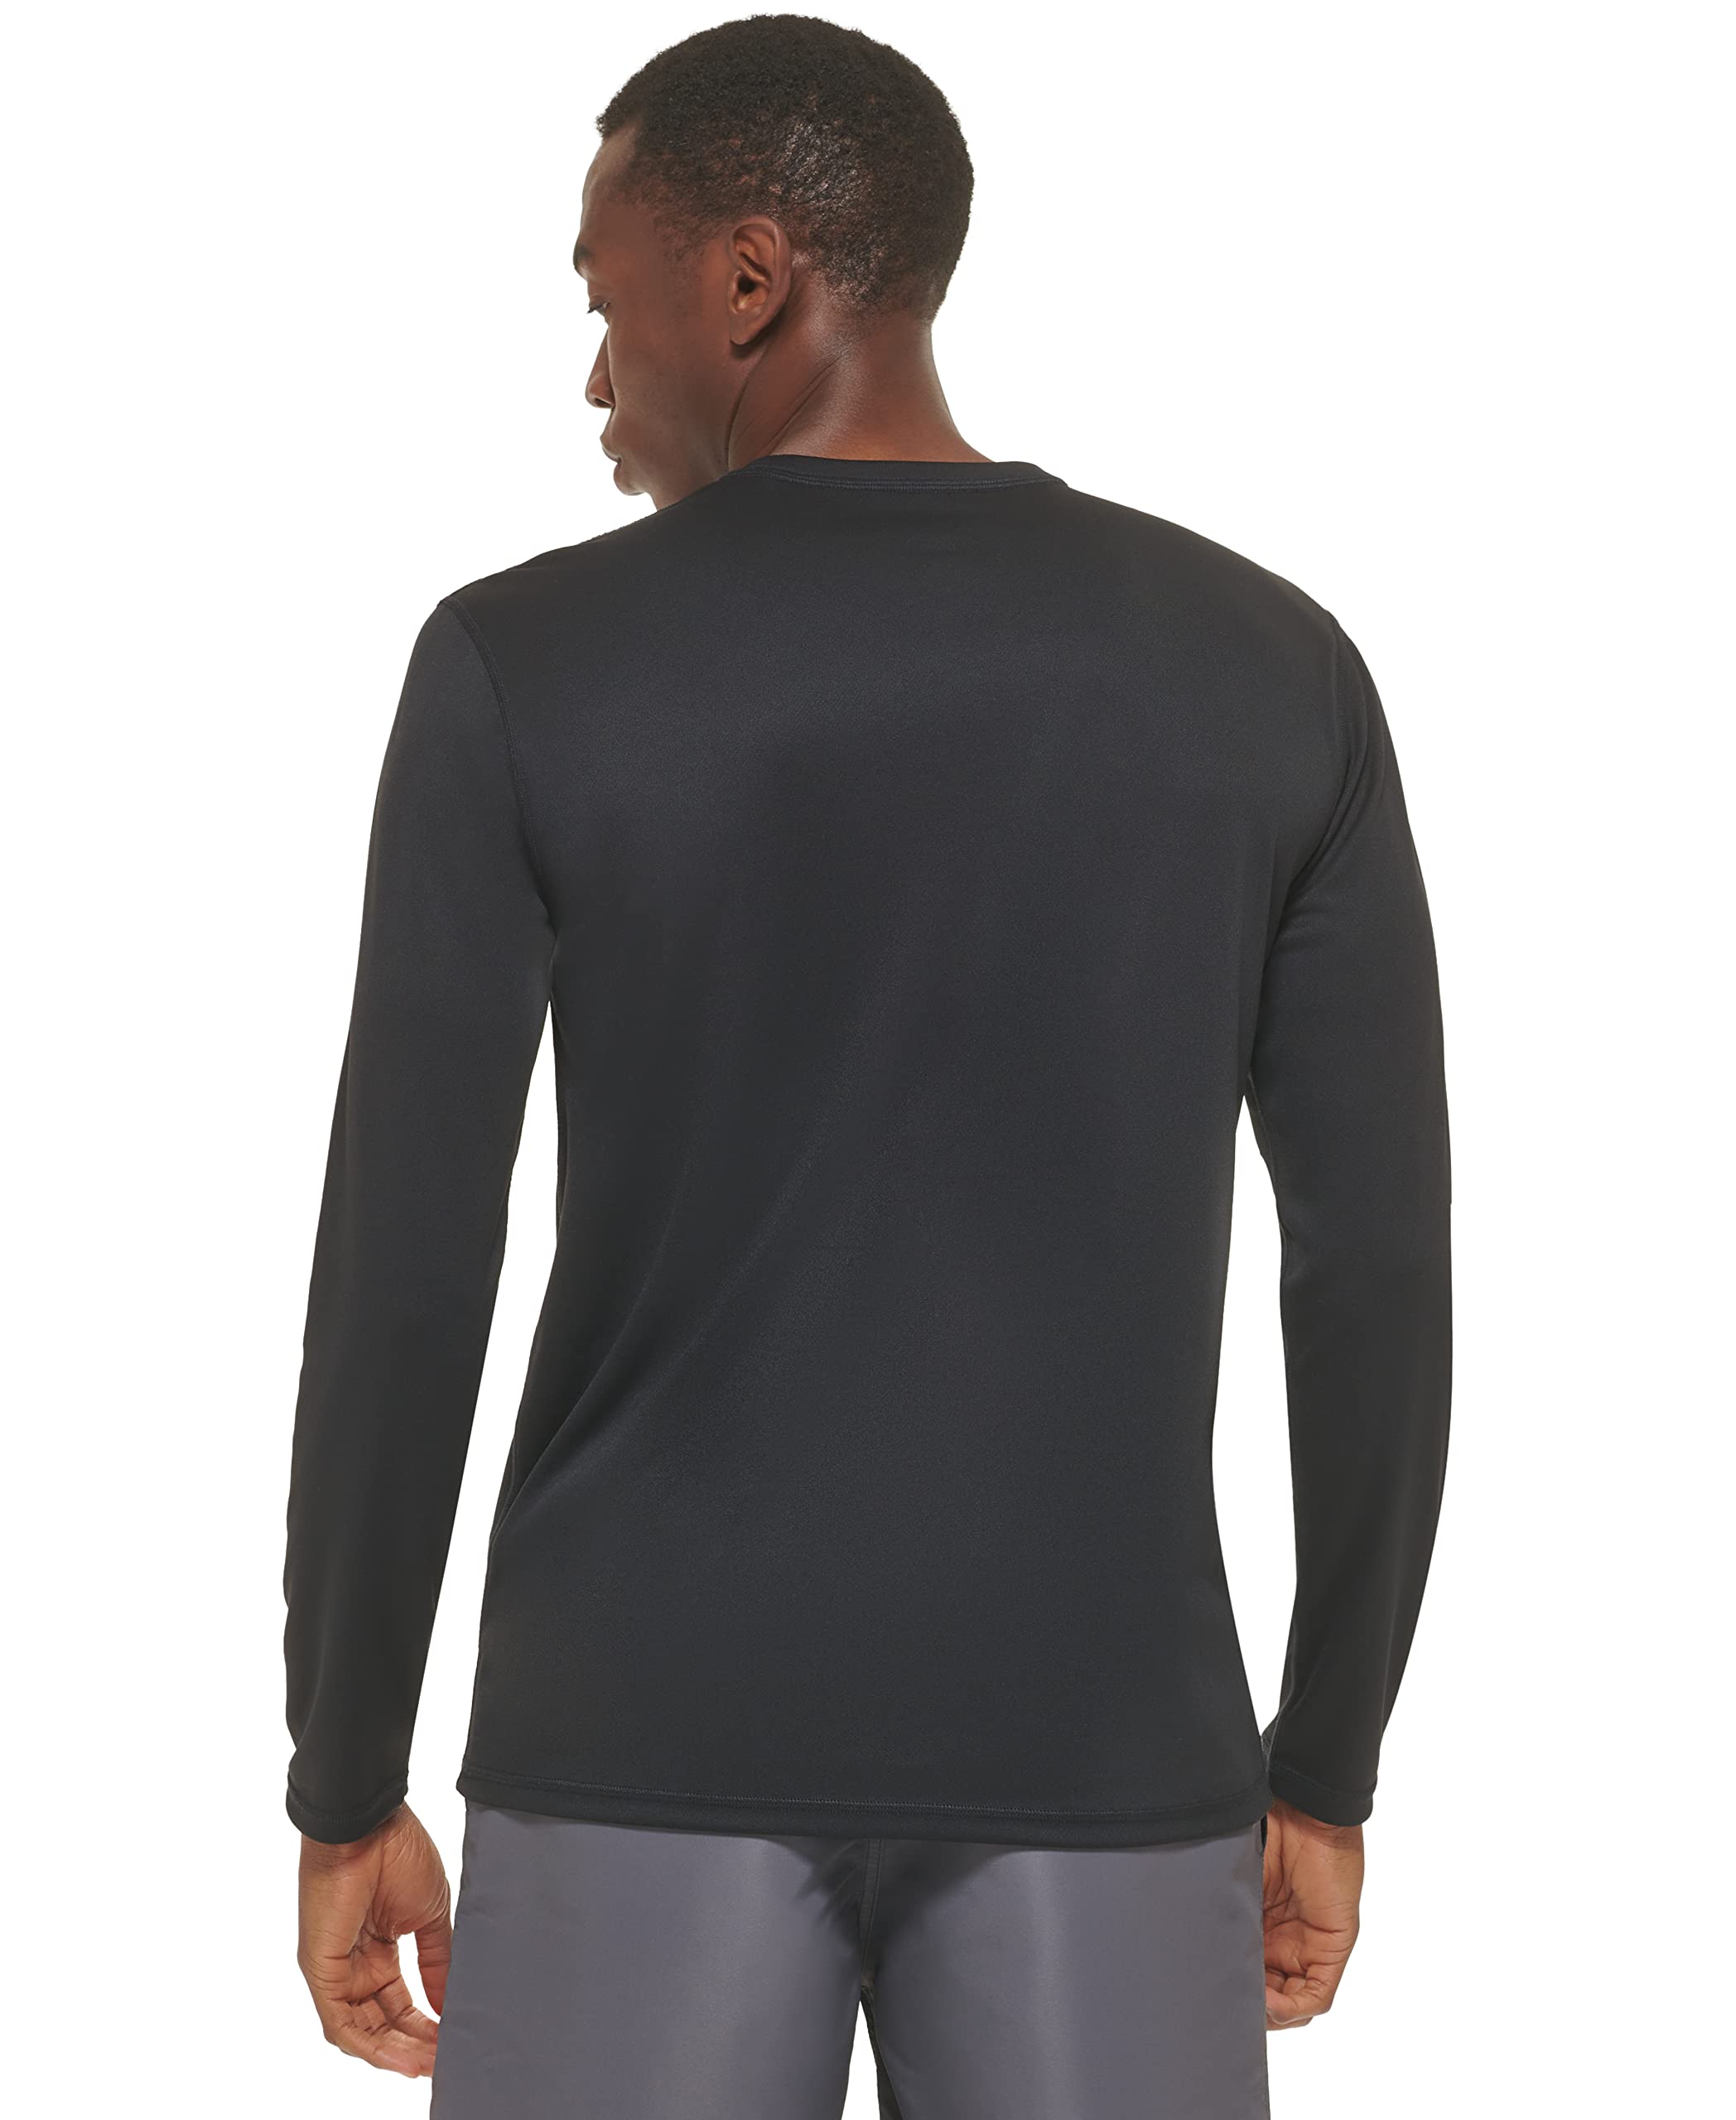 Calvin Klein Men's Light Weight Quick Dry Long Sleeve 40+ UPF Protection